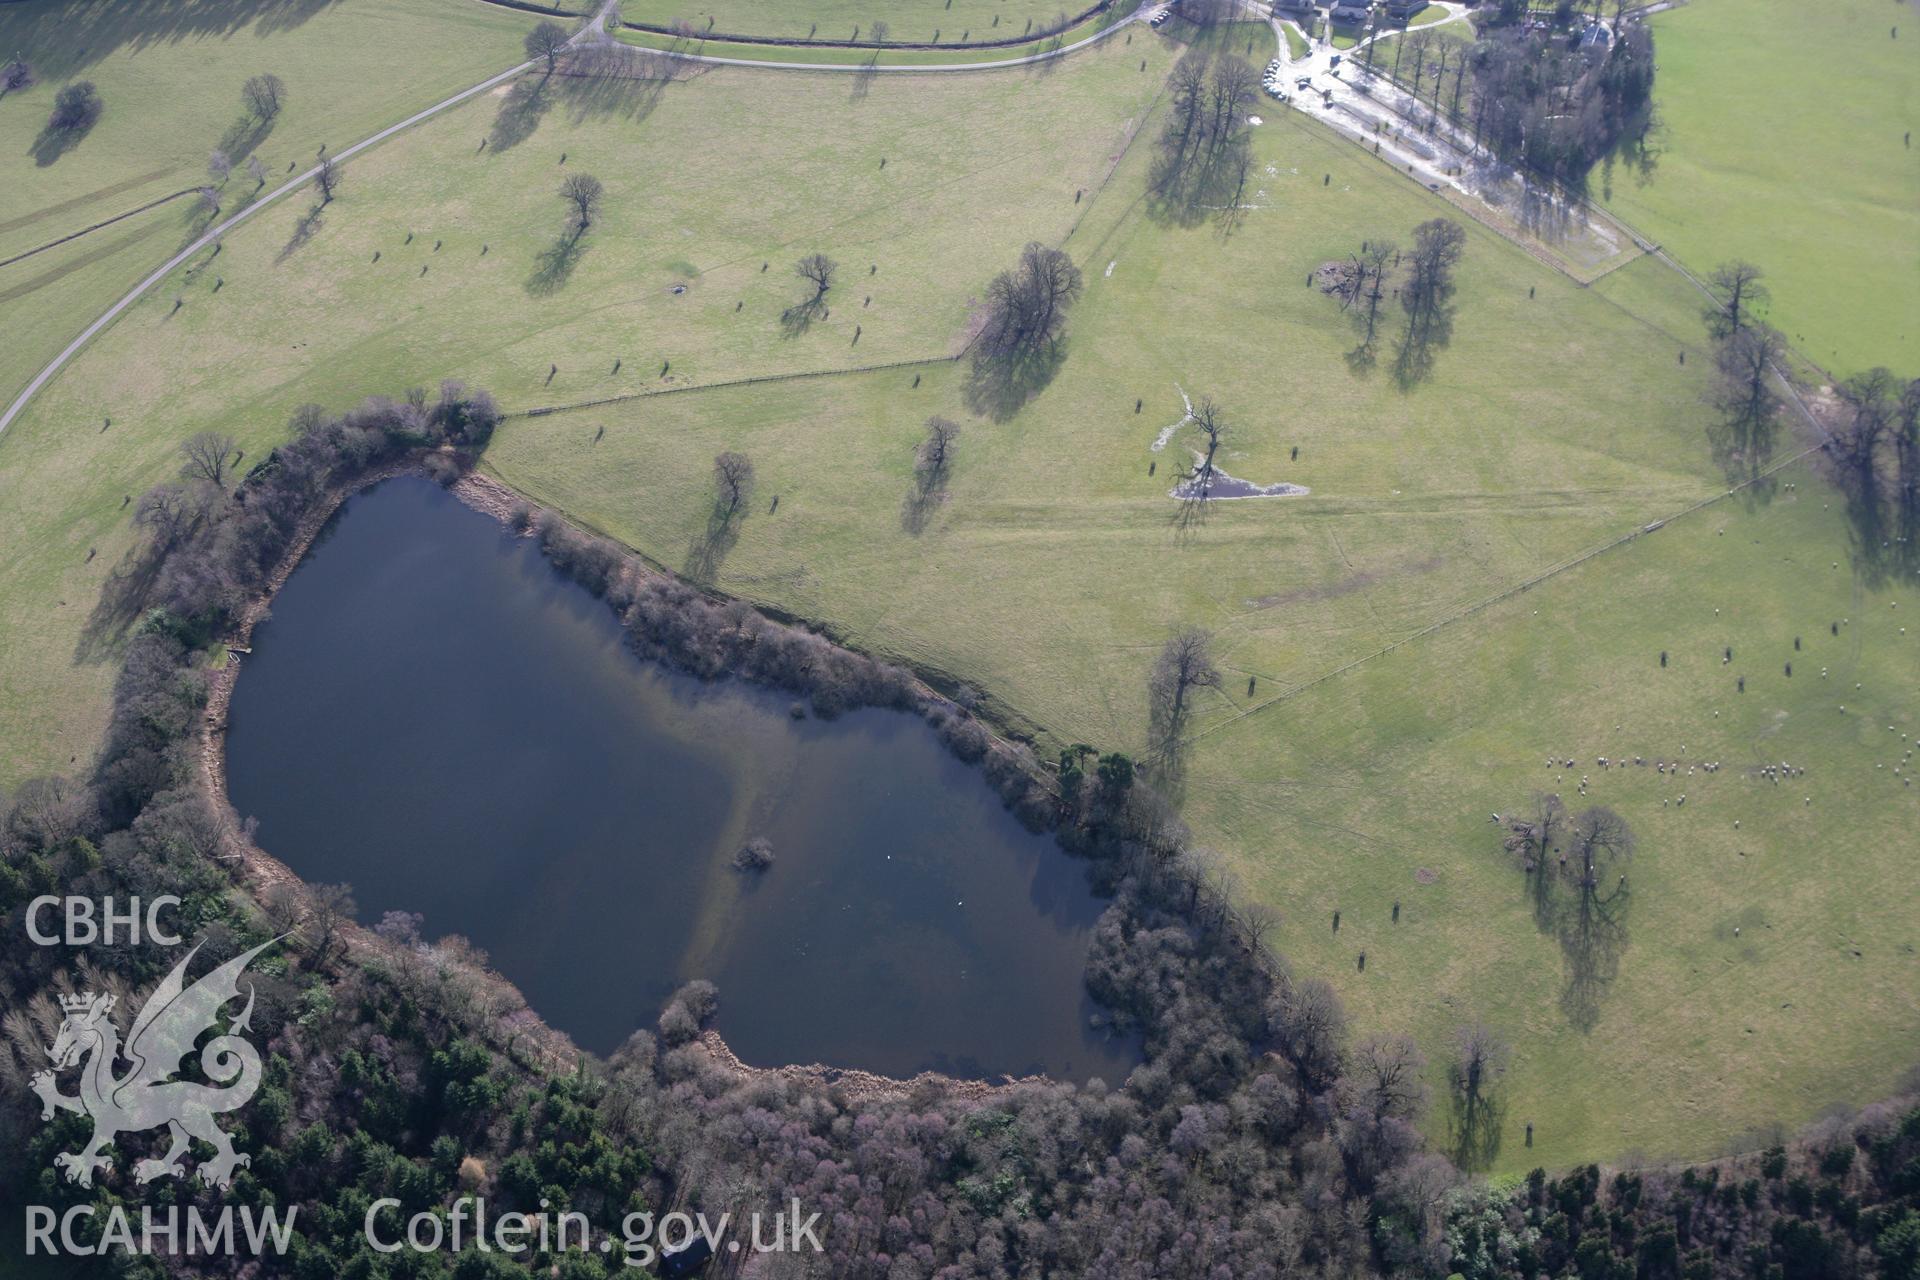 RCAHMW colour oblique photograph of Chirk Castle grounds, park and gardens. Taken by Toby Driver on 08/02/2011.